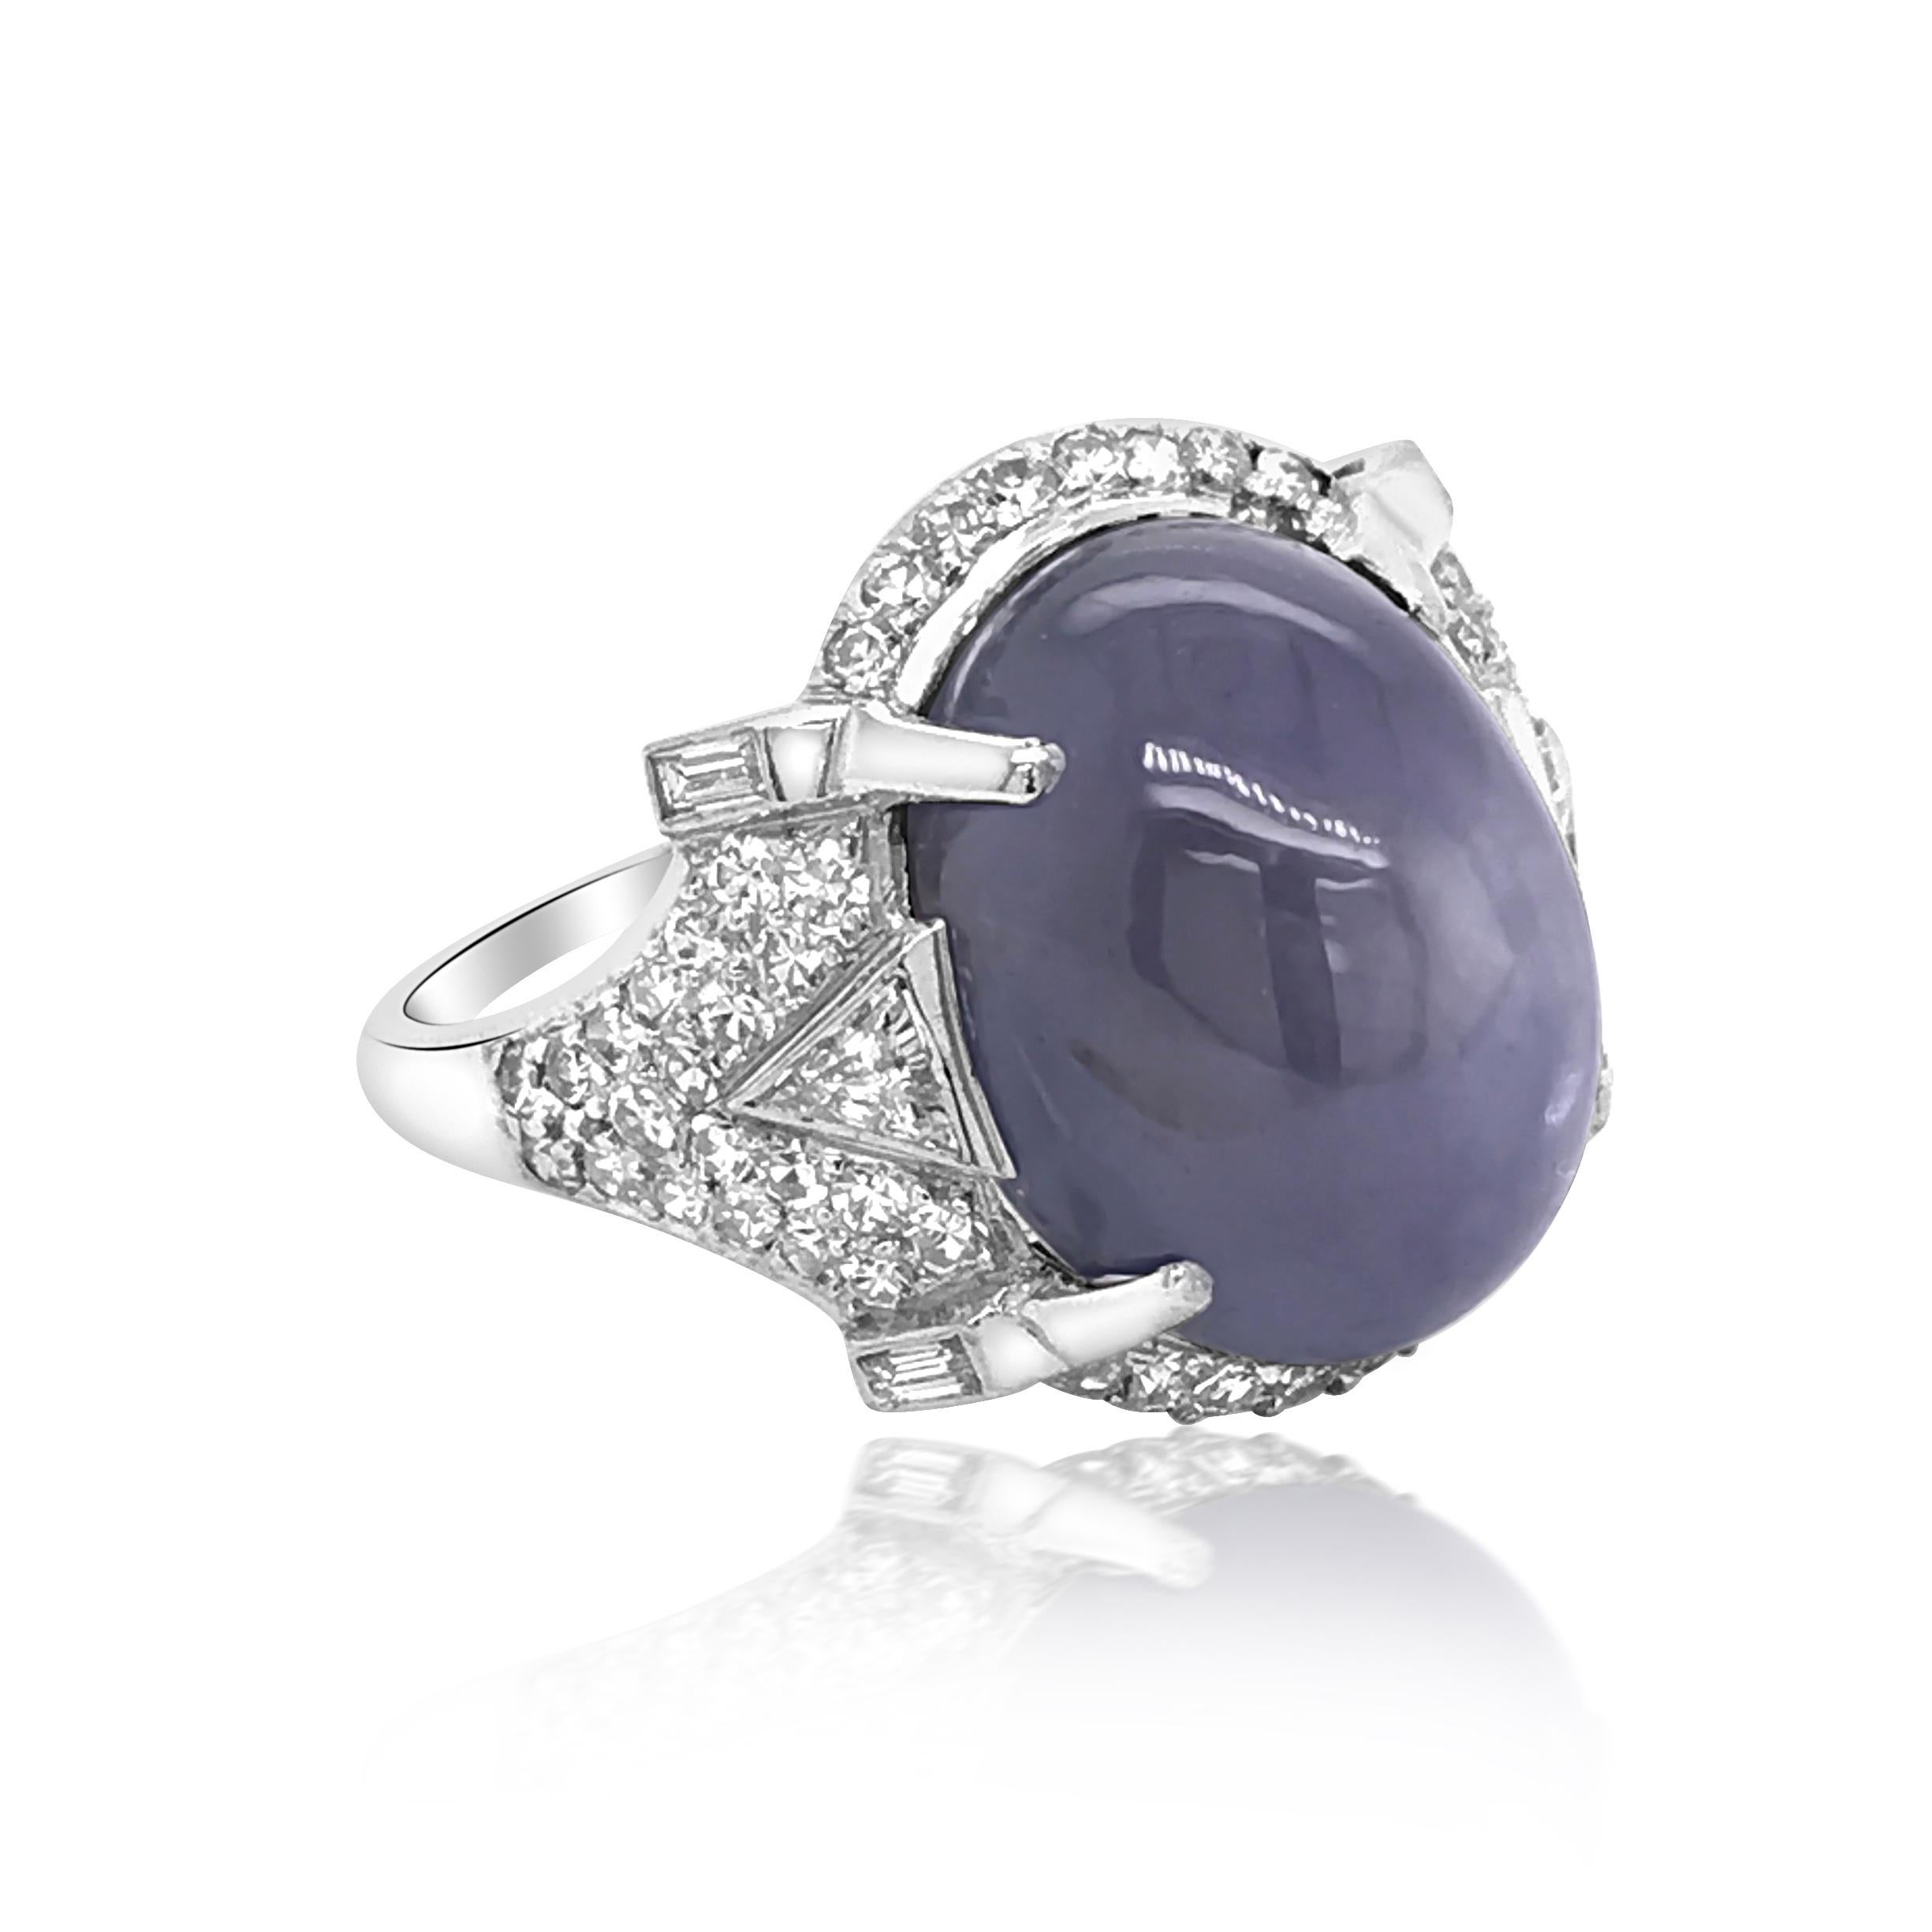 This stunning genuine star sapphire and diamond ring is crafted in solid platinum, weighing 8.48 grams and in size 6.75. Exposing an oval cabochon star sapphire measuring approx. 14.00 x 11.00 x 10.70 mm, weighing approximately, 15ct.Enhanced by